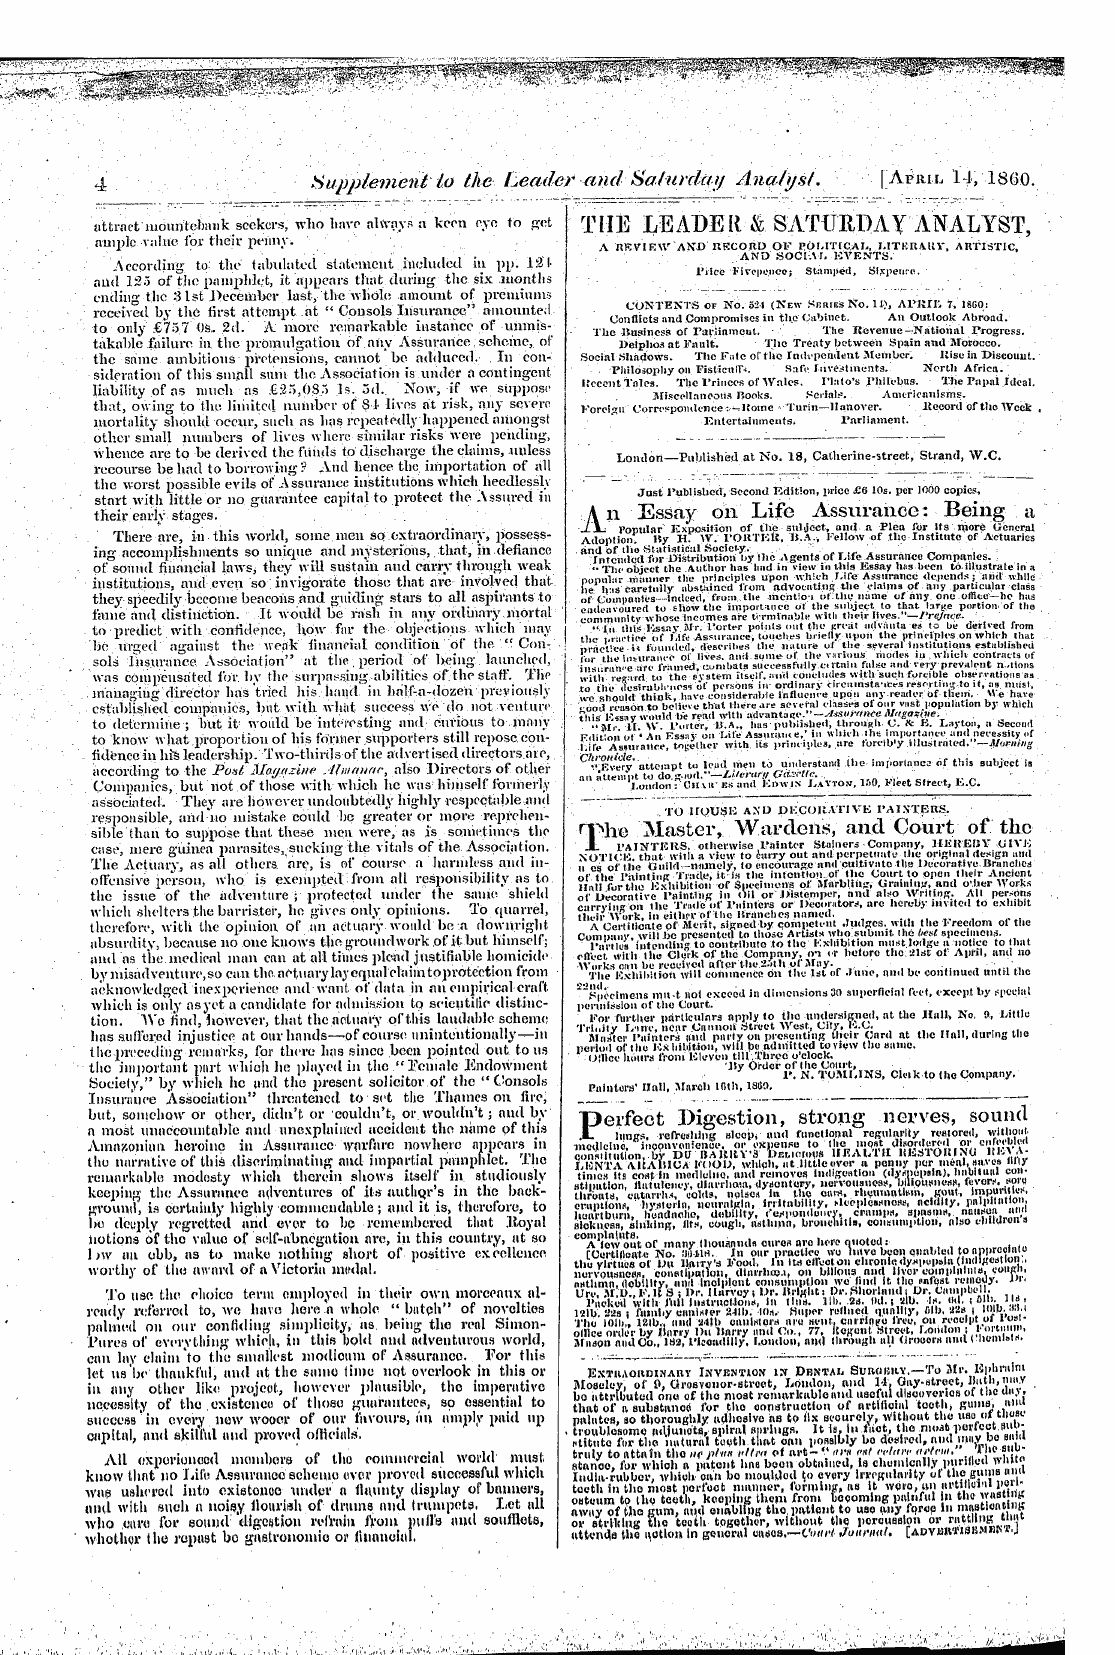 Leader (1850-1860): jS F Y, 1st edition, Supplement to no. 525: 4